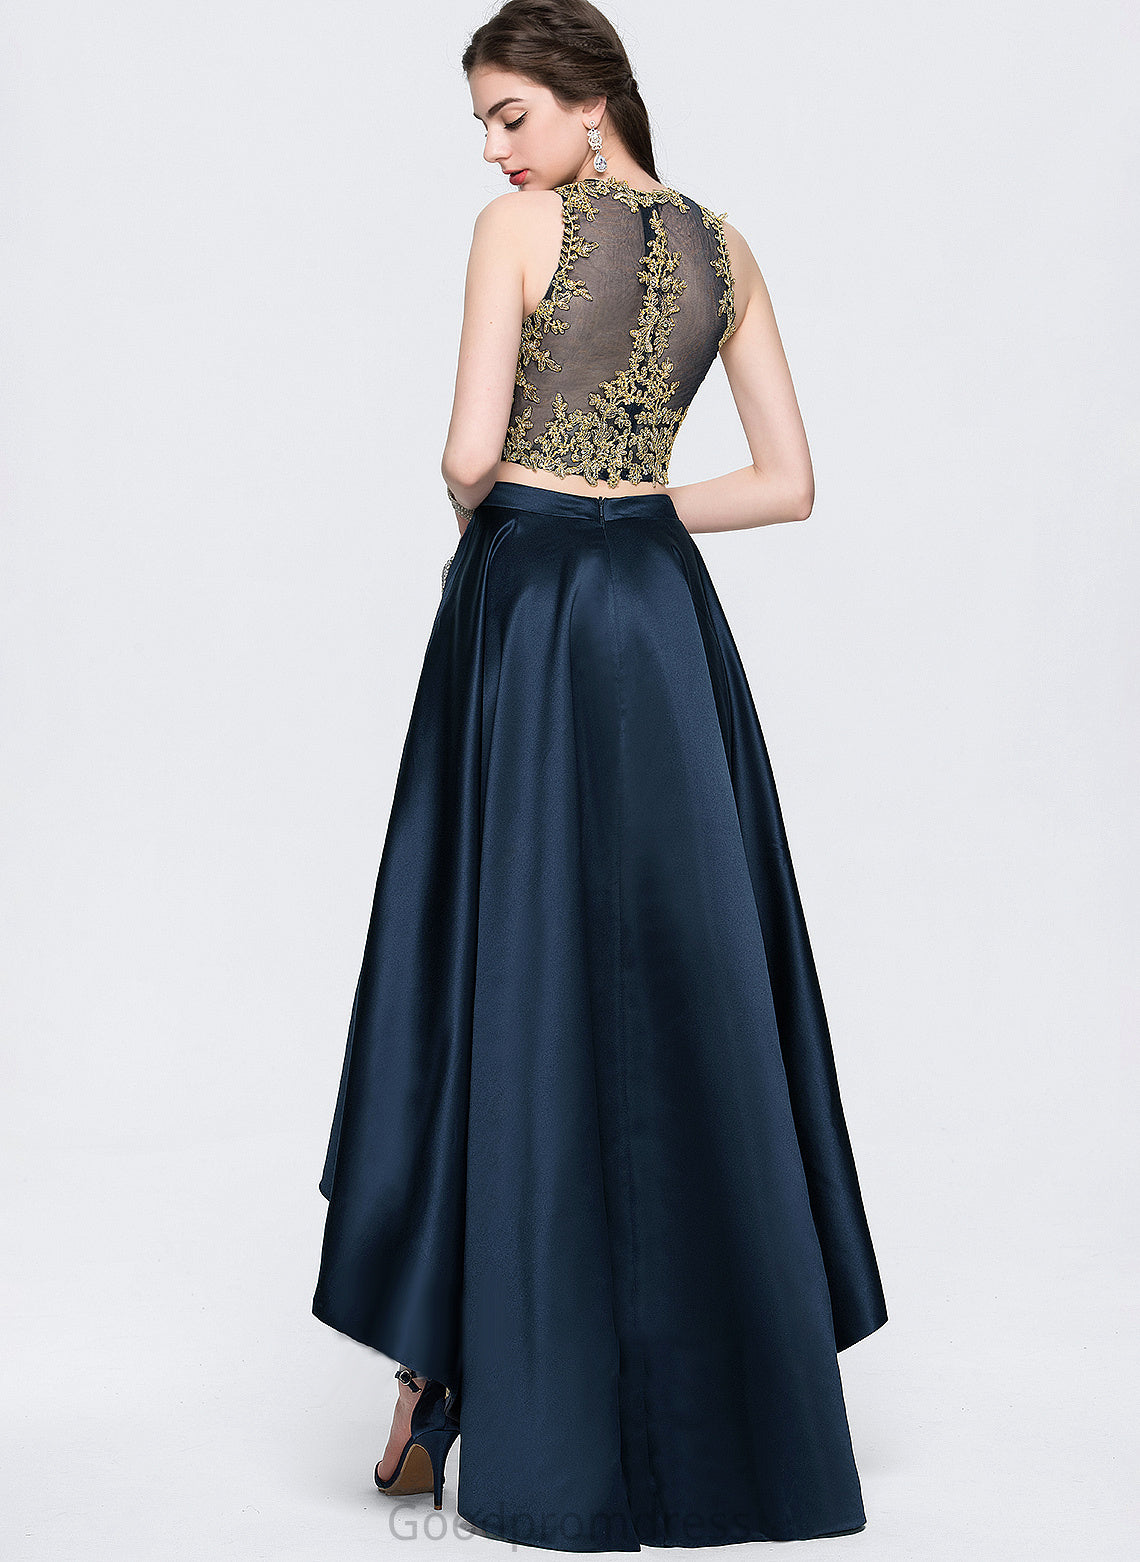 Beading Neck Stella Asymmetrical A-Line Scoop Lace Prom Dresses With Satin Sequins